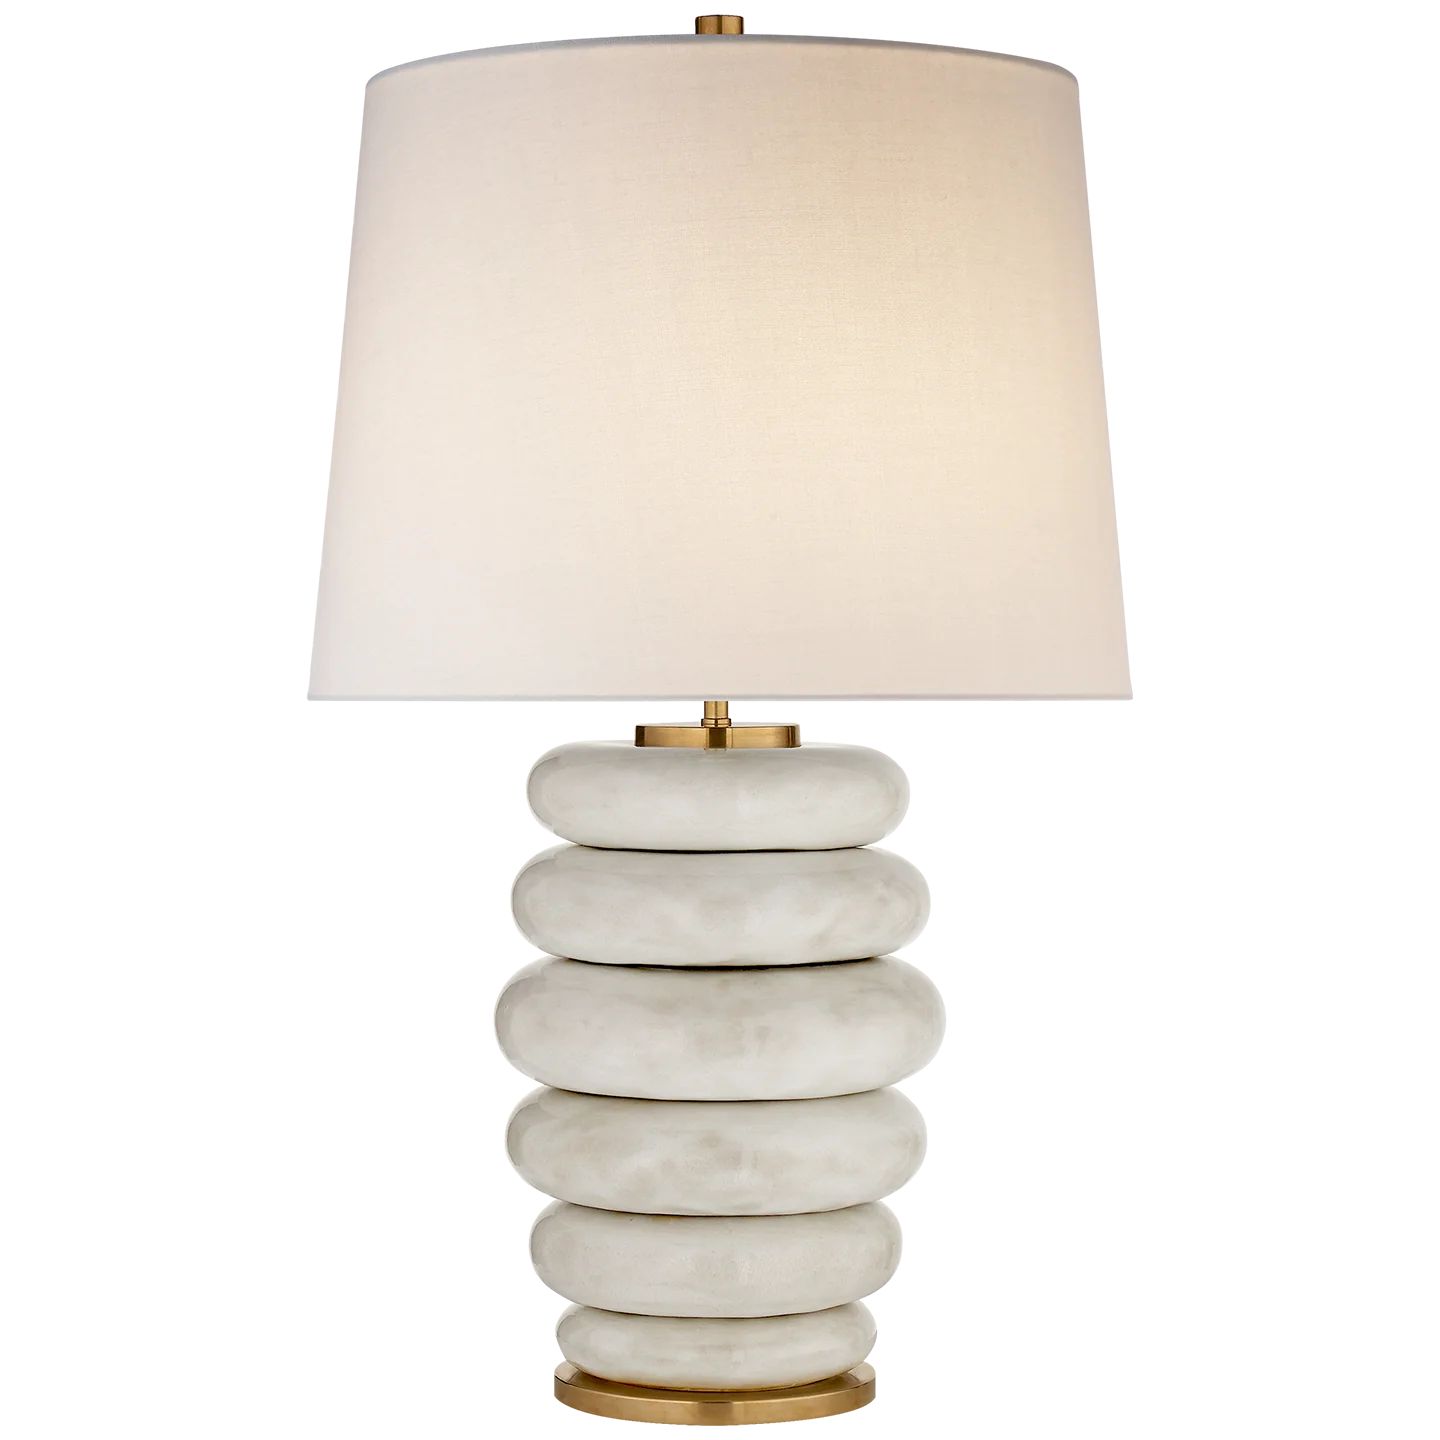 Phoebe Stacked Table Lamp in Various Colors | Burke Decor